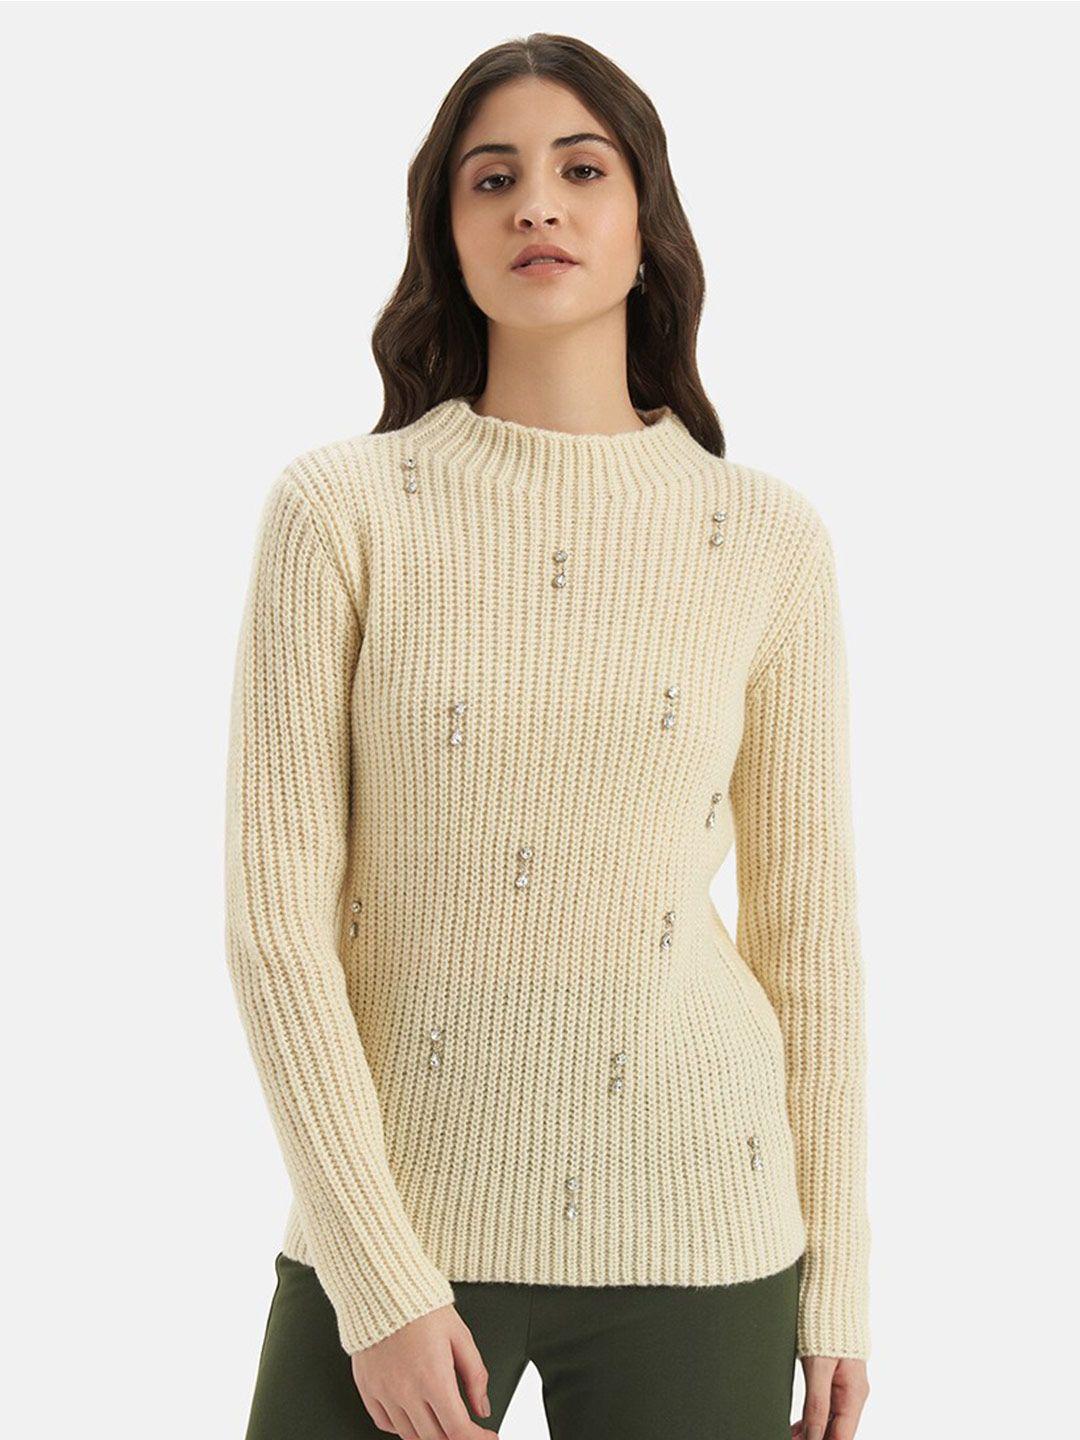 kazo open knit mock collar long sleeves embellished pullover sweater